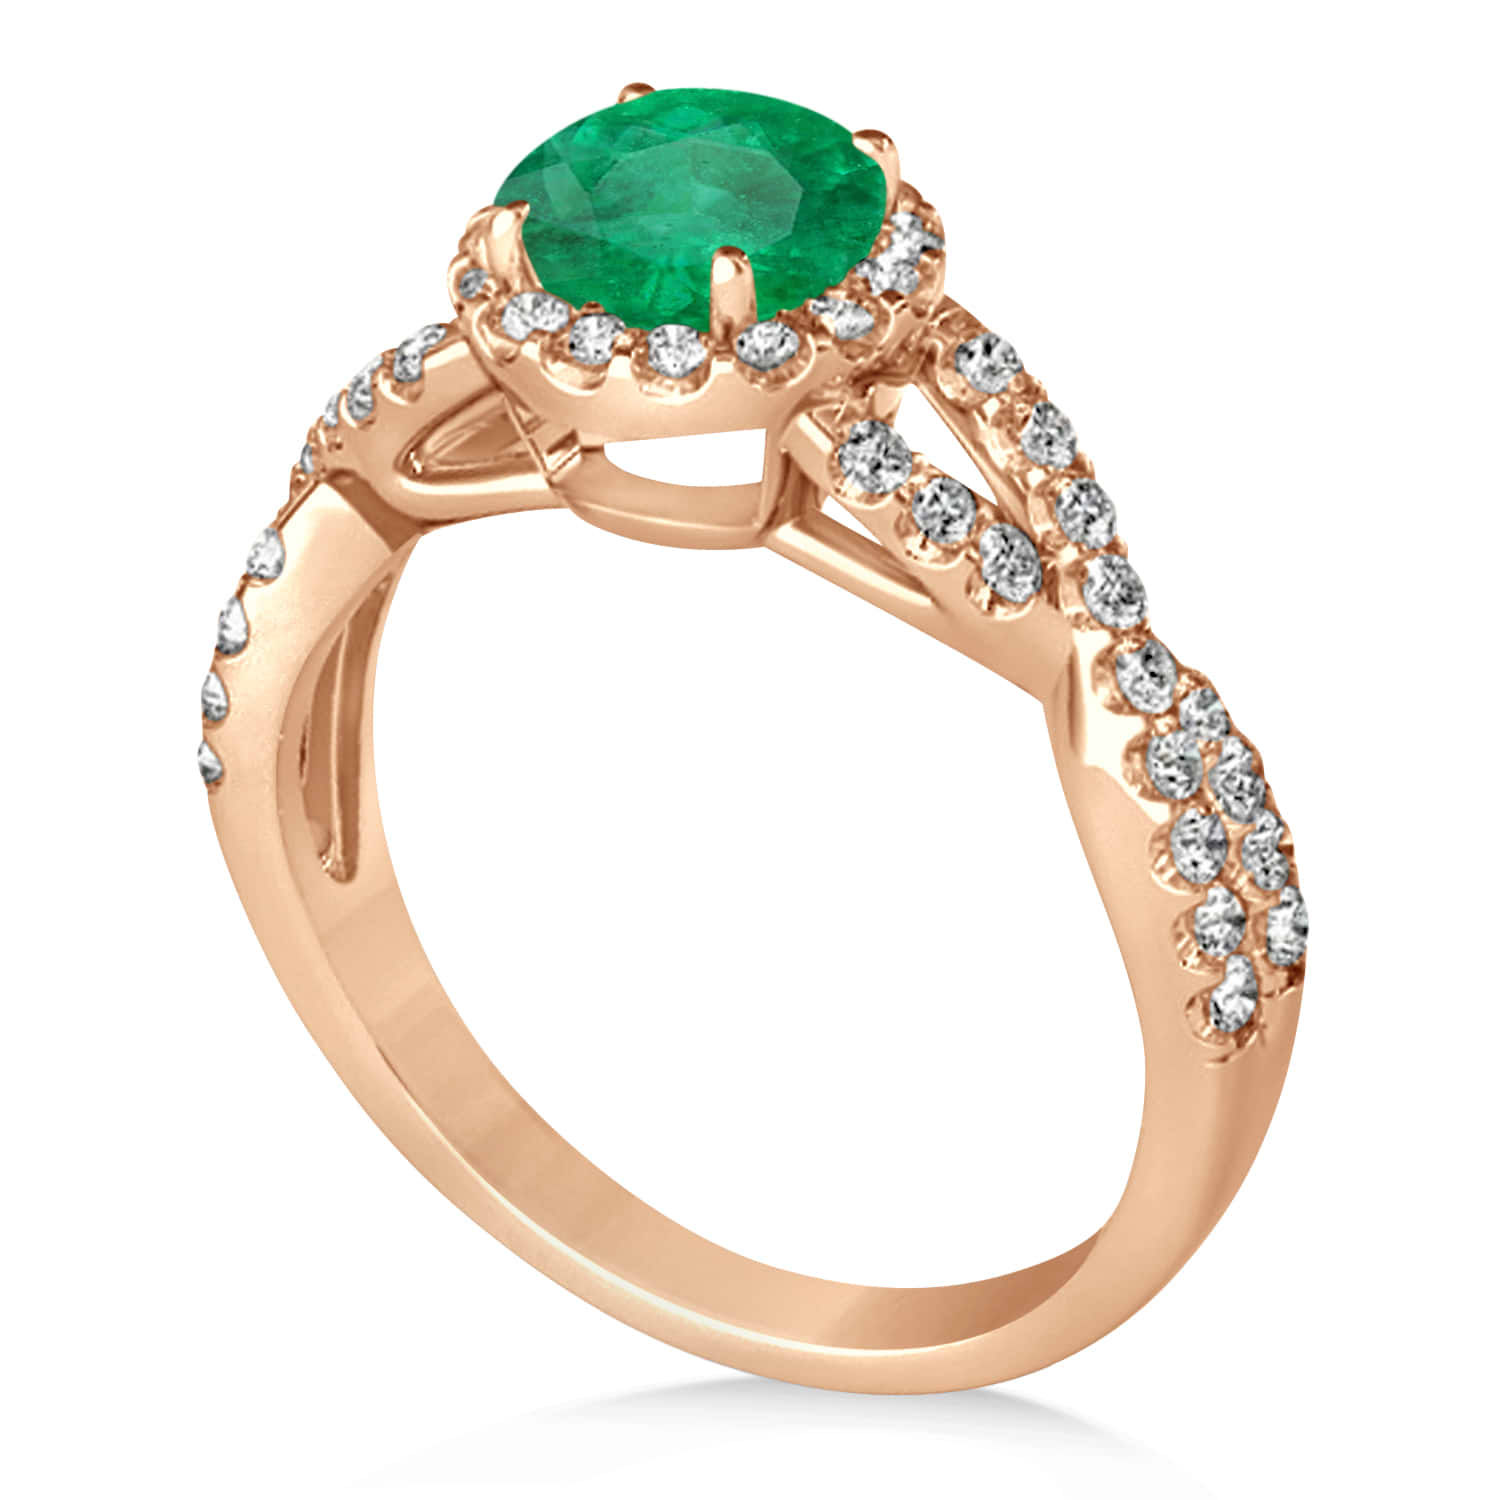 Emerald & Diamond Twisted Engagement Ring 18k Rose Gold 1.30ct